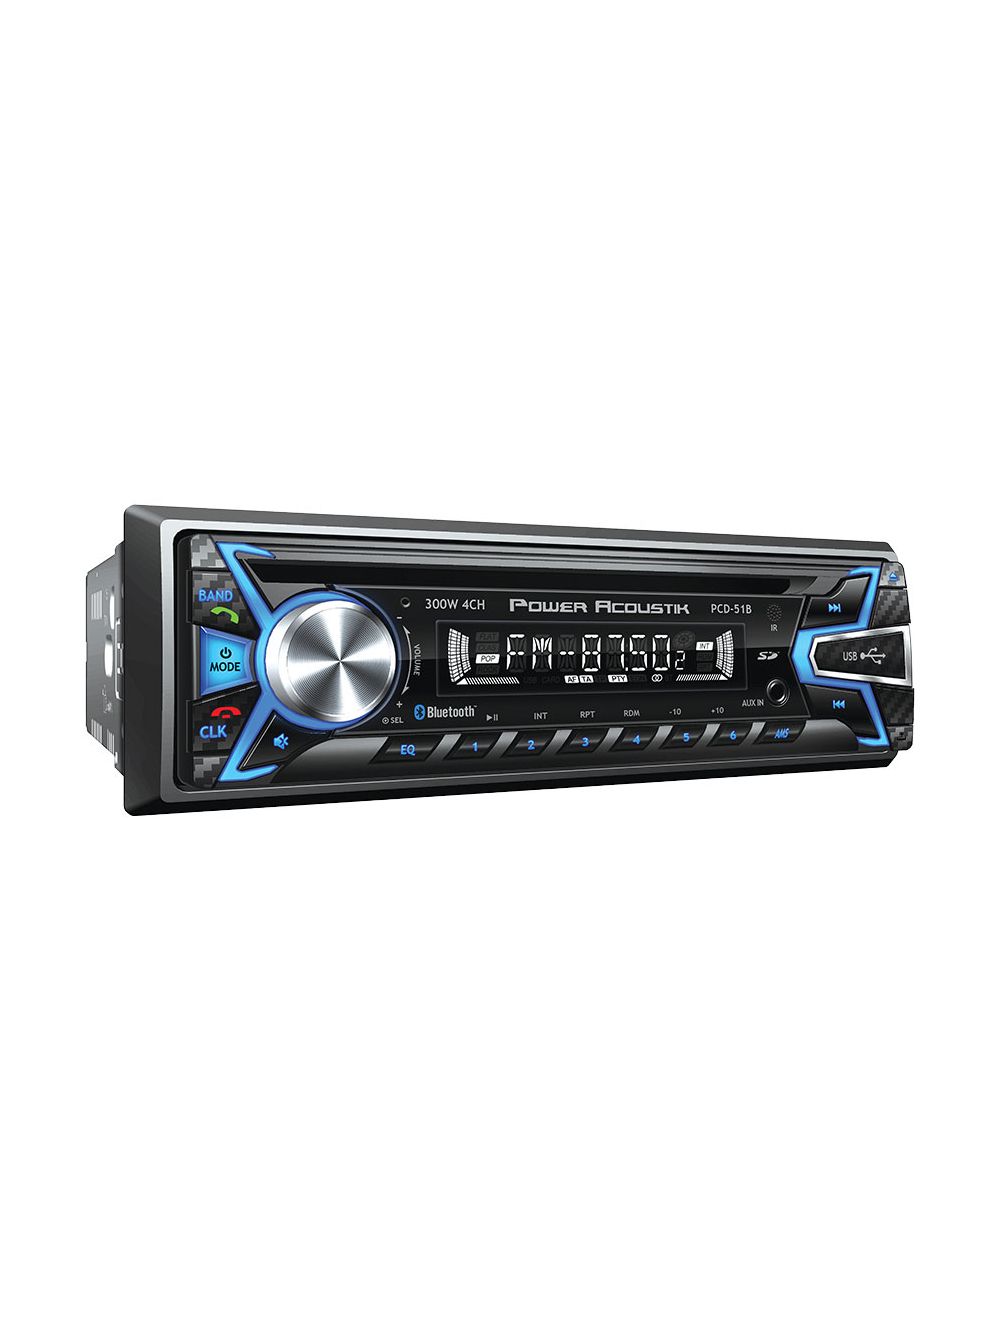 Power Acoustik PCD51B 1DIN CD/MP3/AM/FM Receiver with SD/USB Playback and Bluetooth (PCD-51B)